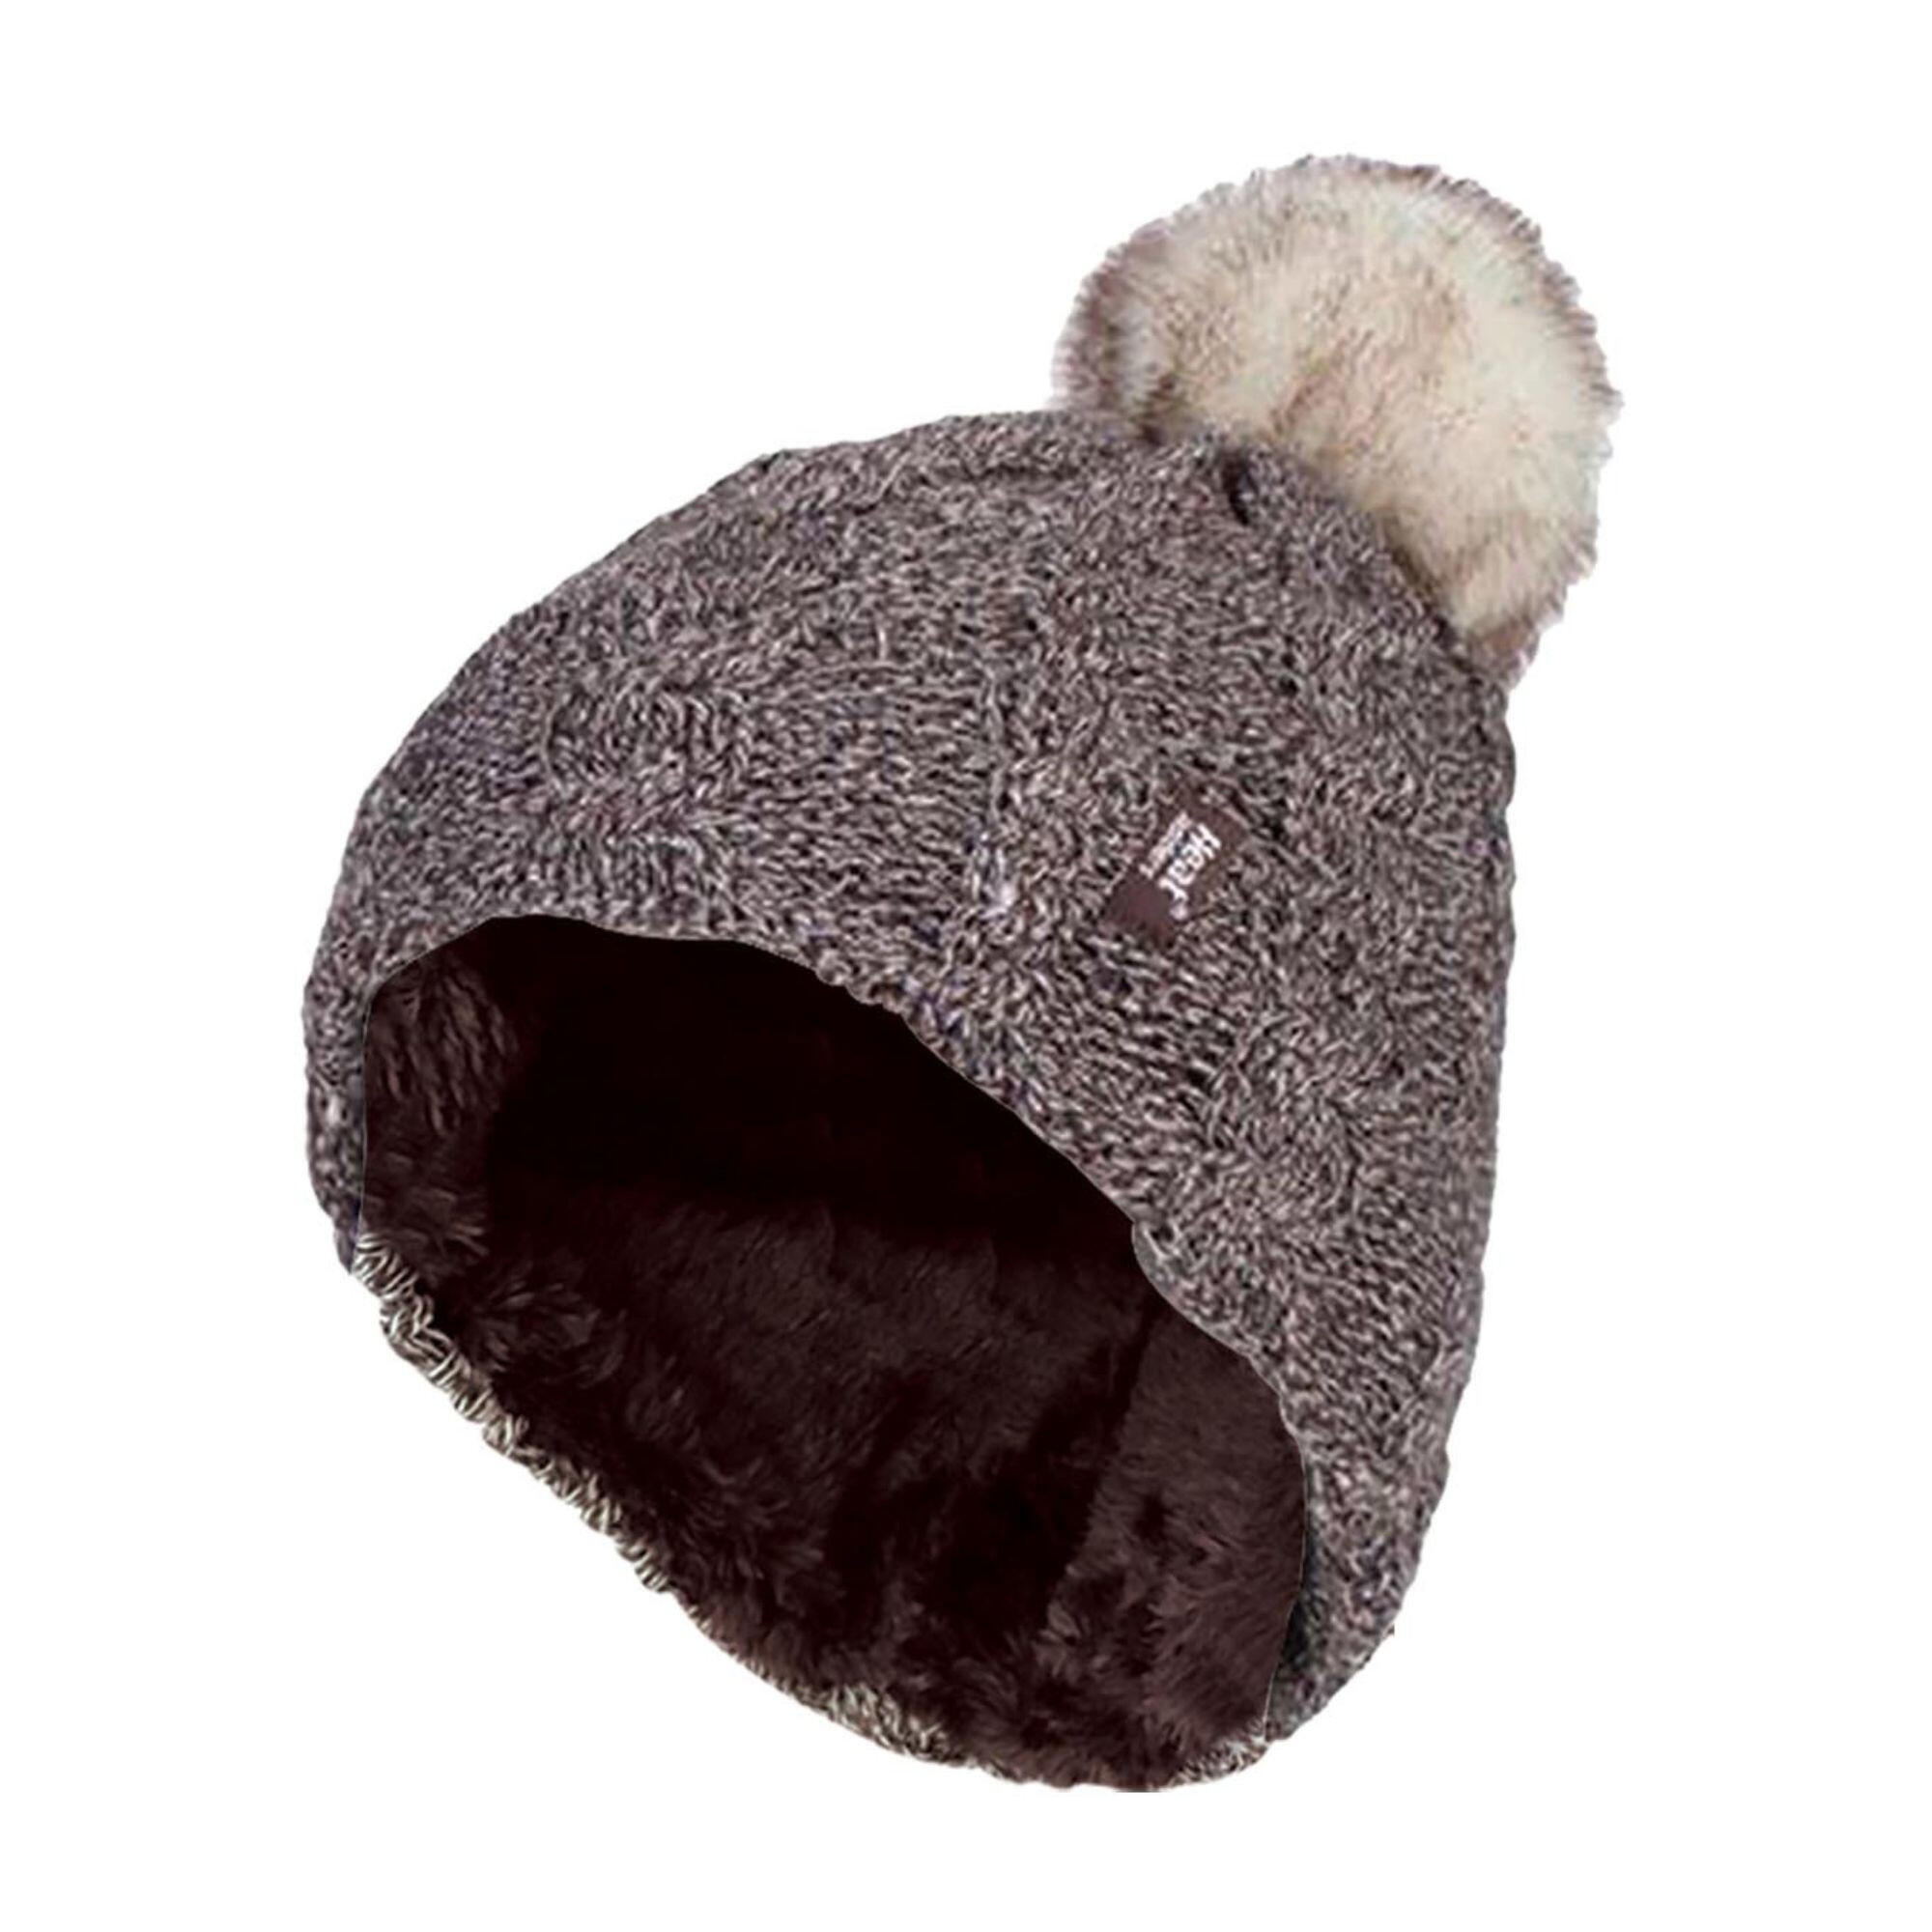 HEAT HOLDERS Ladies Knit Fleece Lined Thermal Bobble Hat with Pom Pom